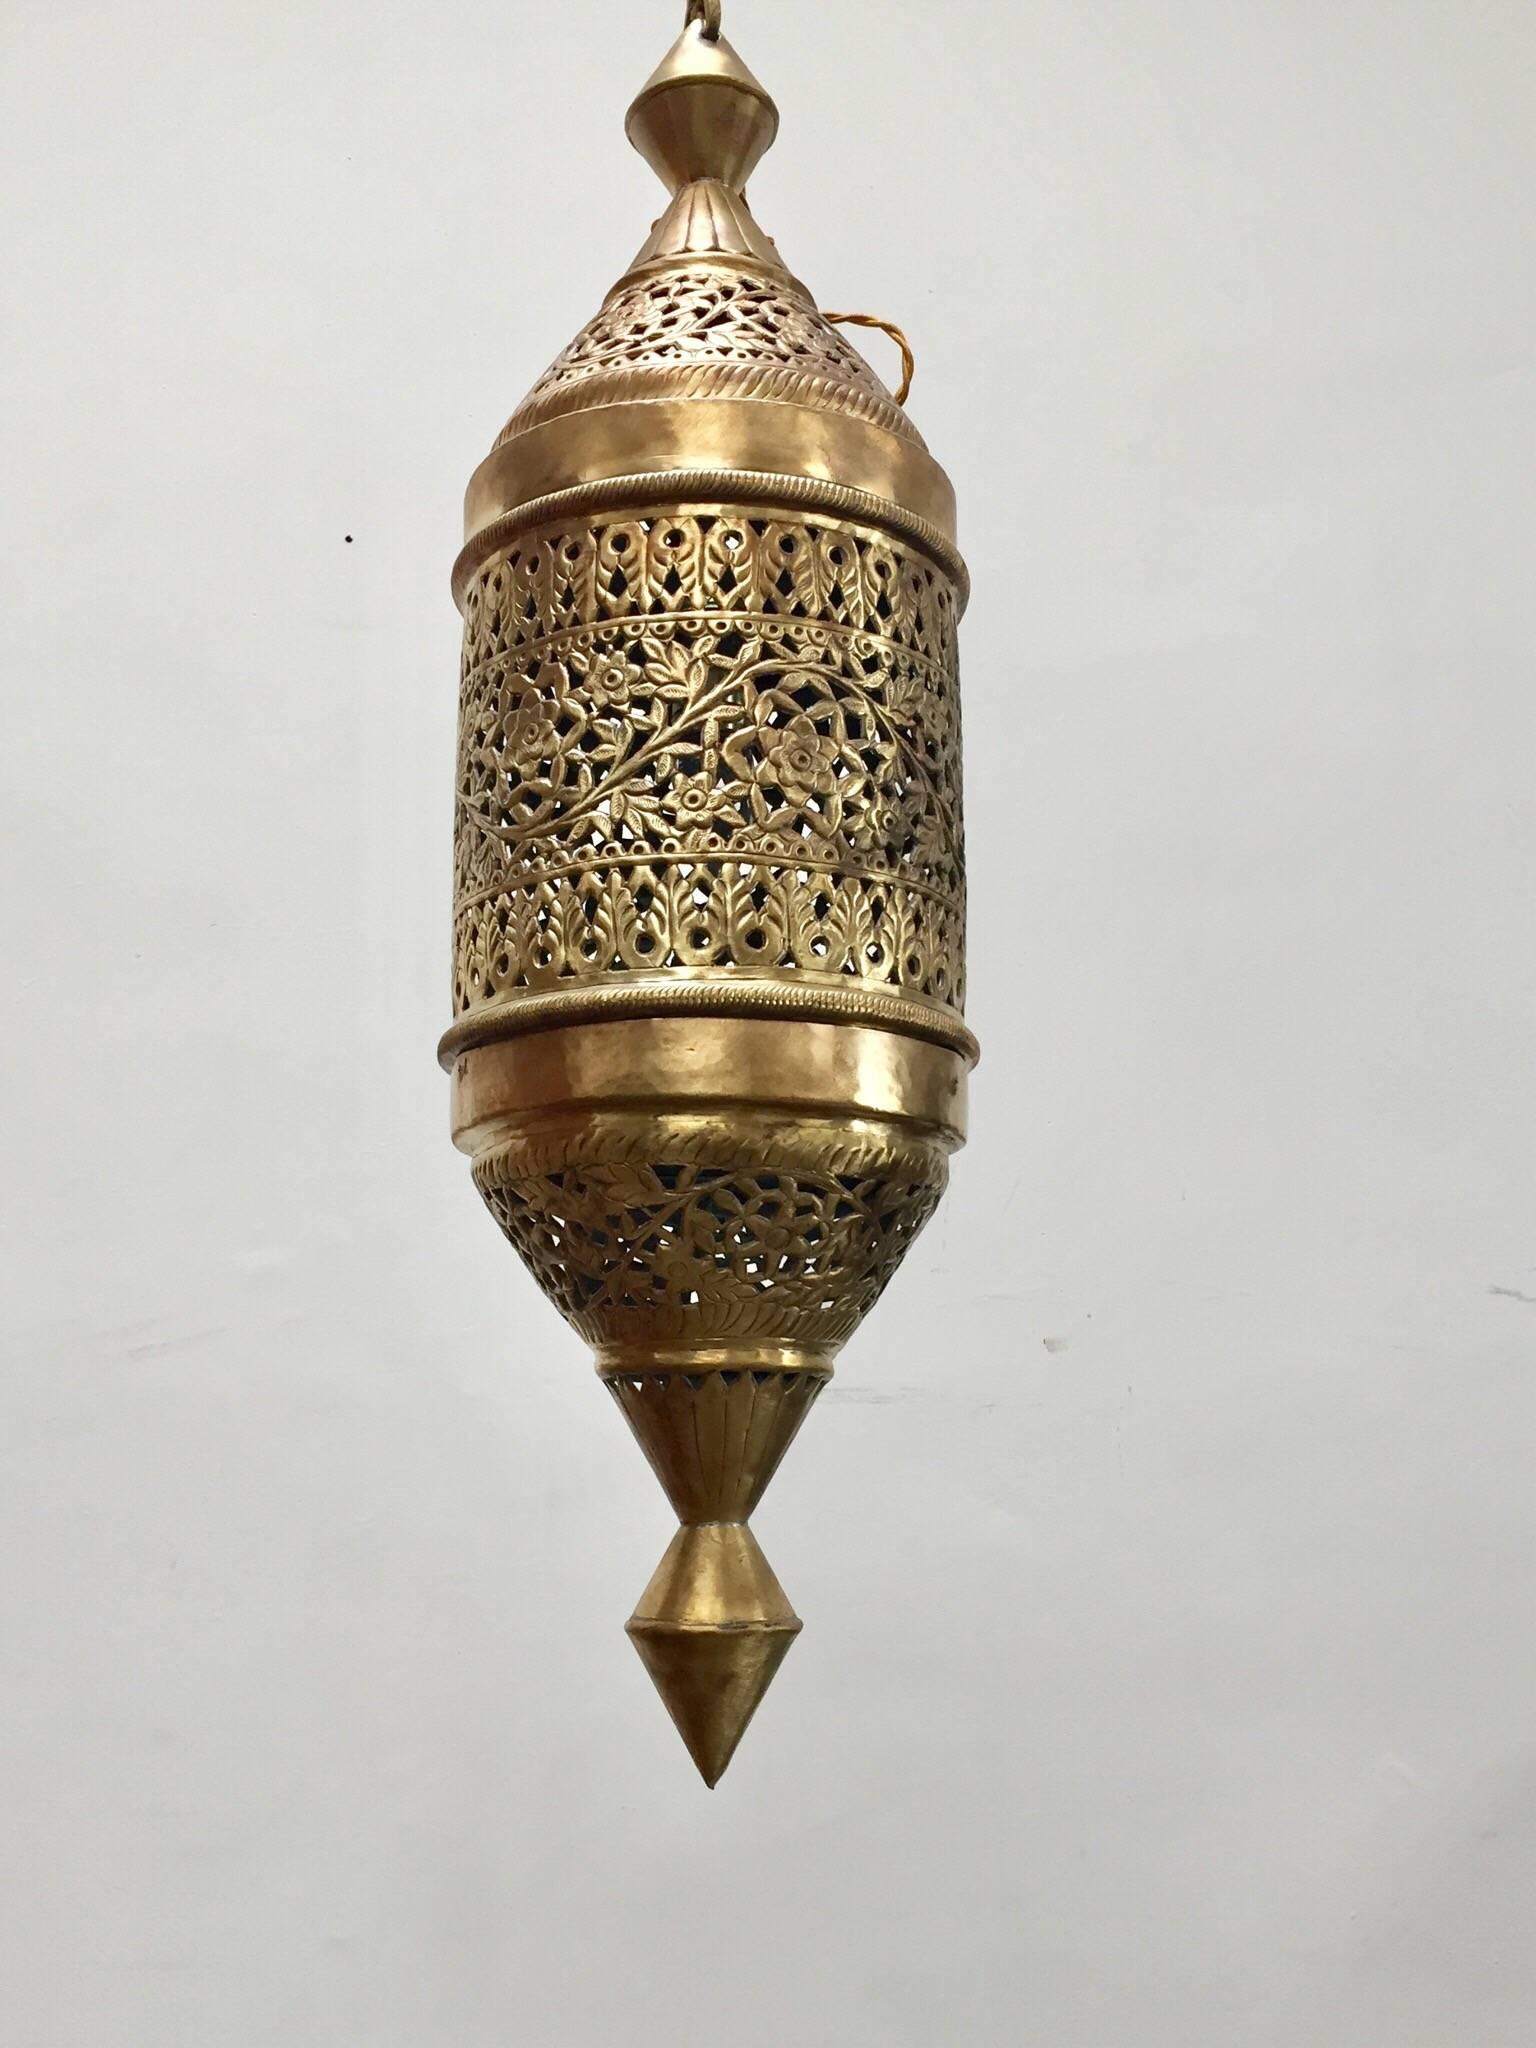 Moroccan Moorish brass polished handcrafted pendulum shaped pendant light fixture. 
The pendant is constructed from solid brass embellished with hand-hammered and chased filigree and hand pierced into floral and geometric motifs.
Handcrafted in